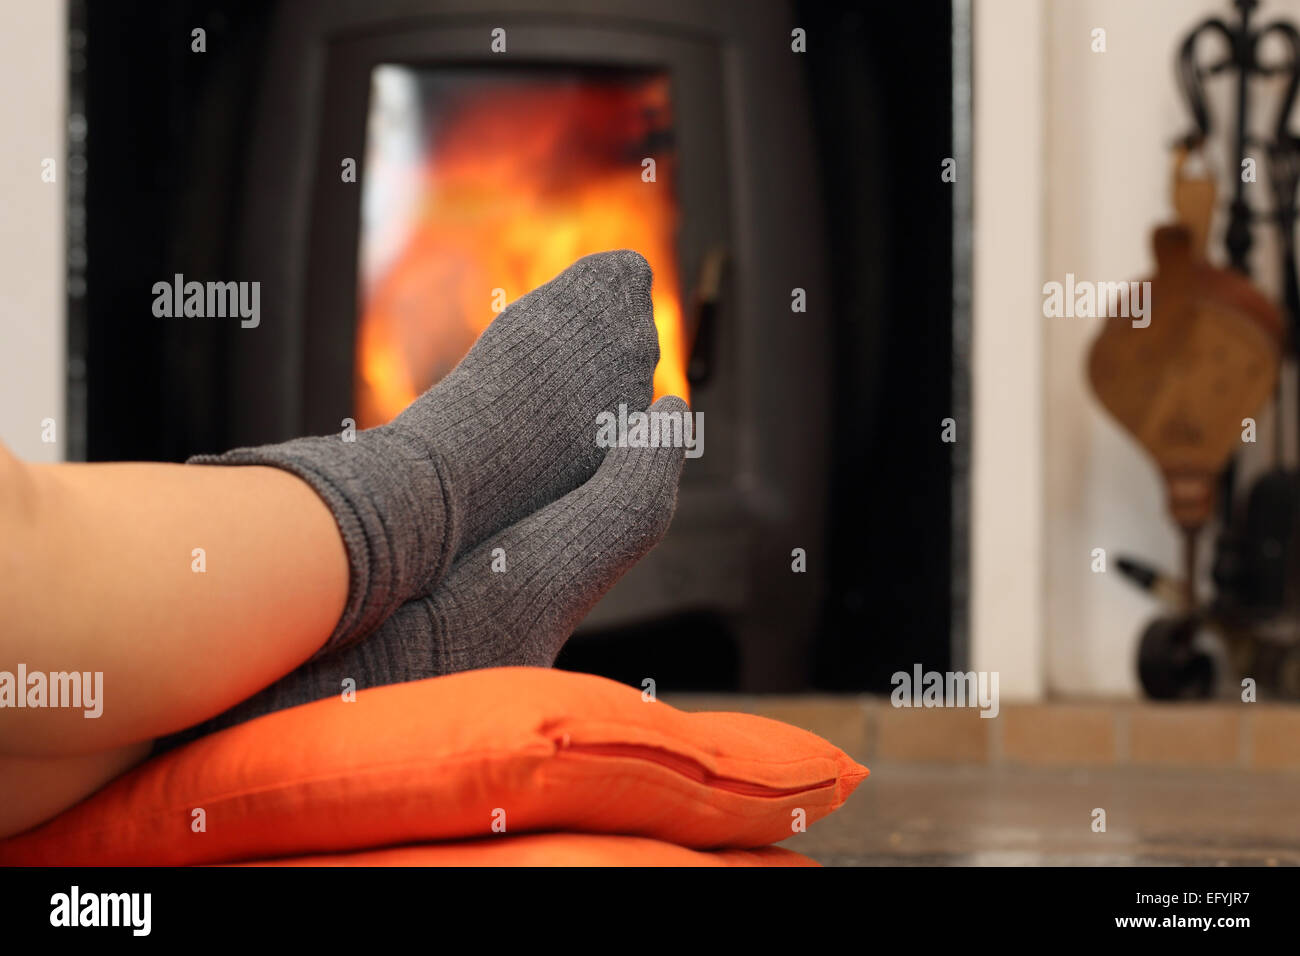 Woman feet with socks resting near fire place with a warmth background Stock Photo